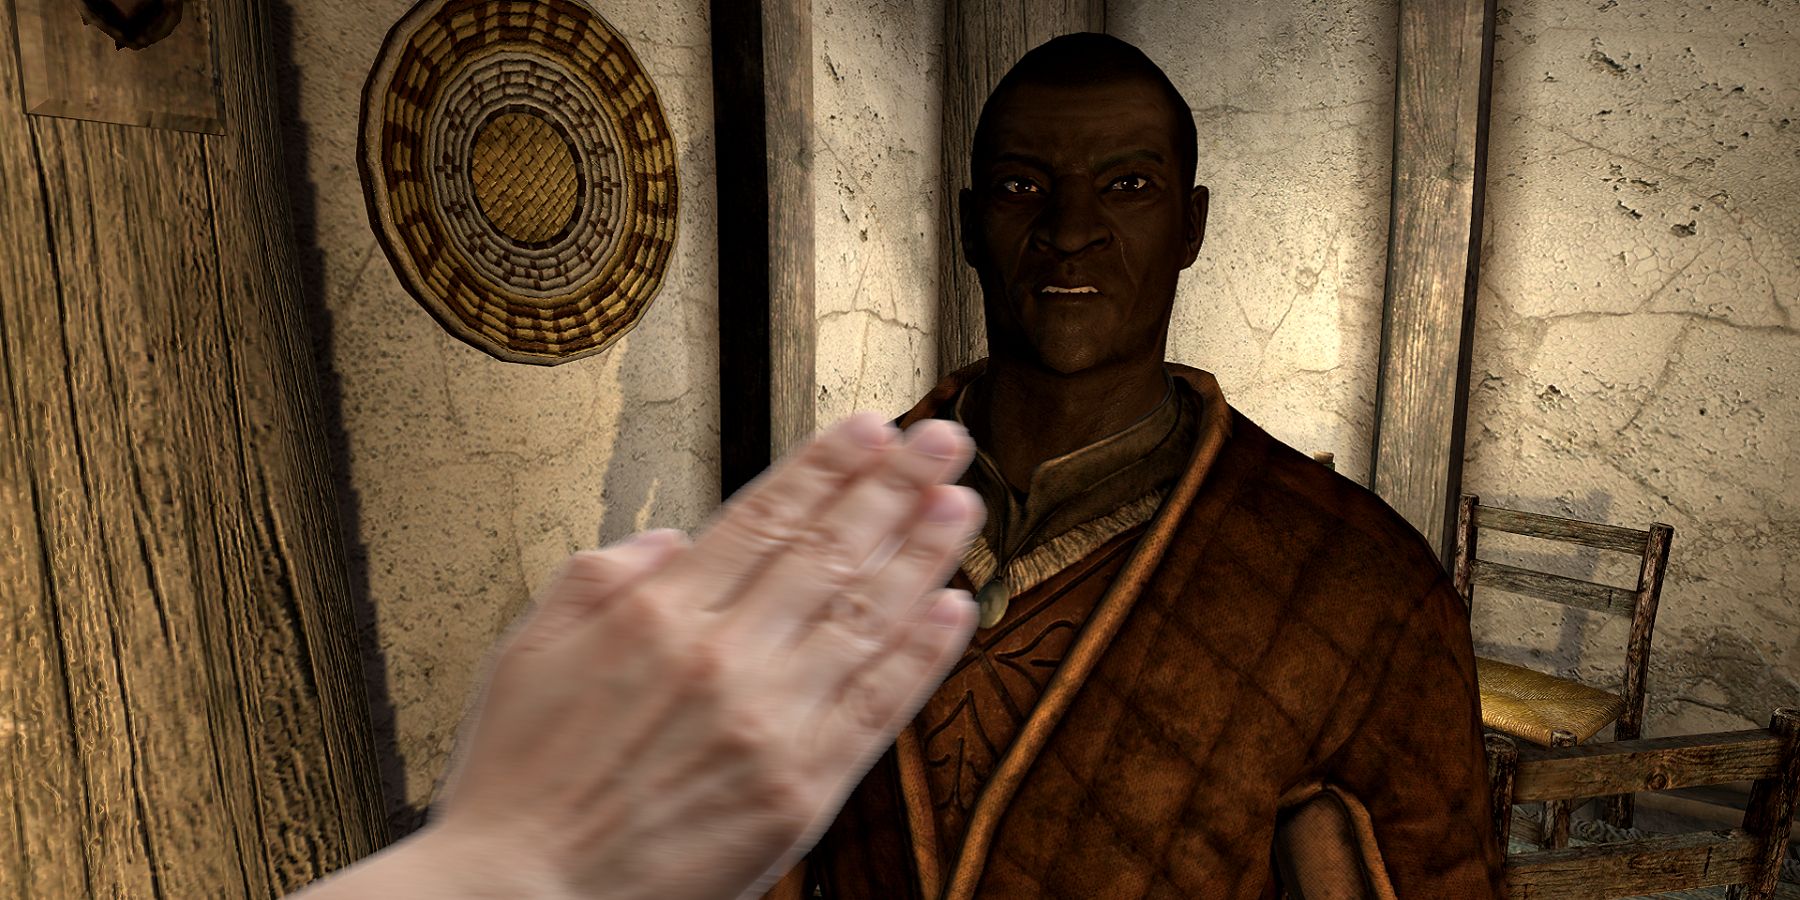 This Skyrim VR Clip Showing a Player Casually Slapping Nazeem is Hysterical